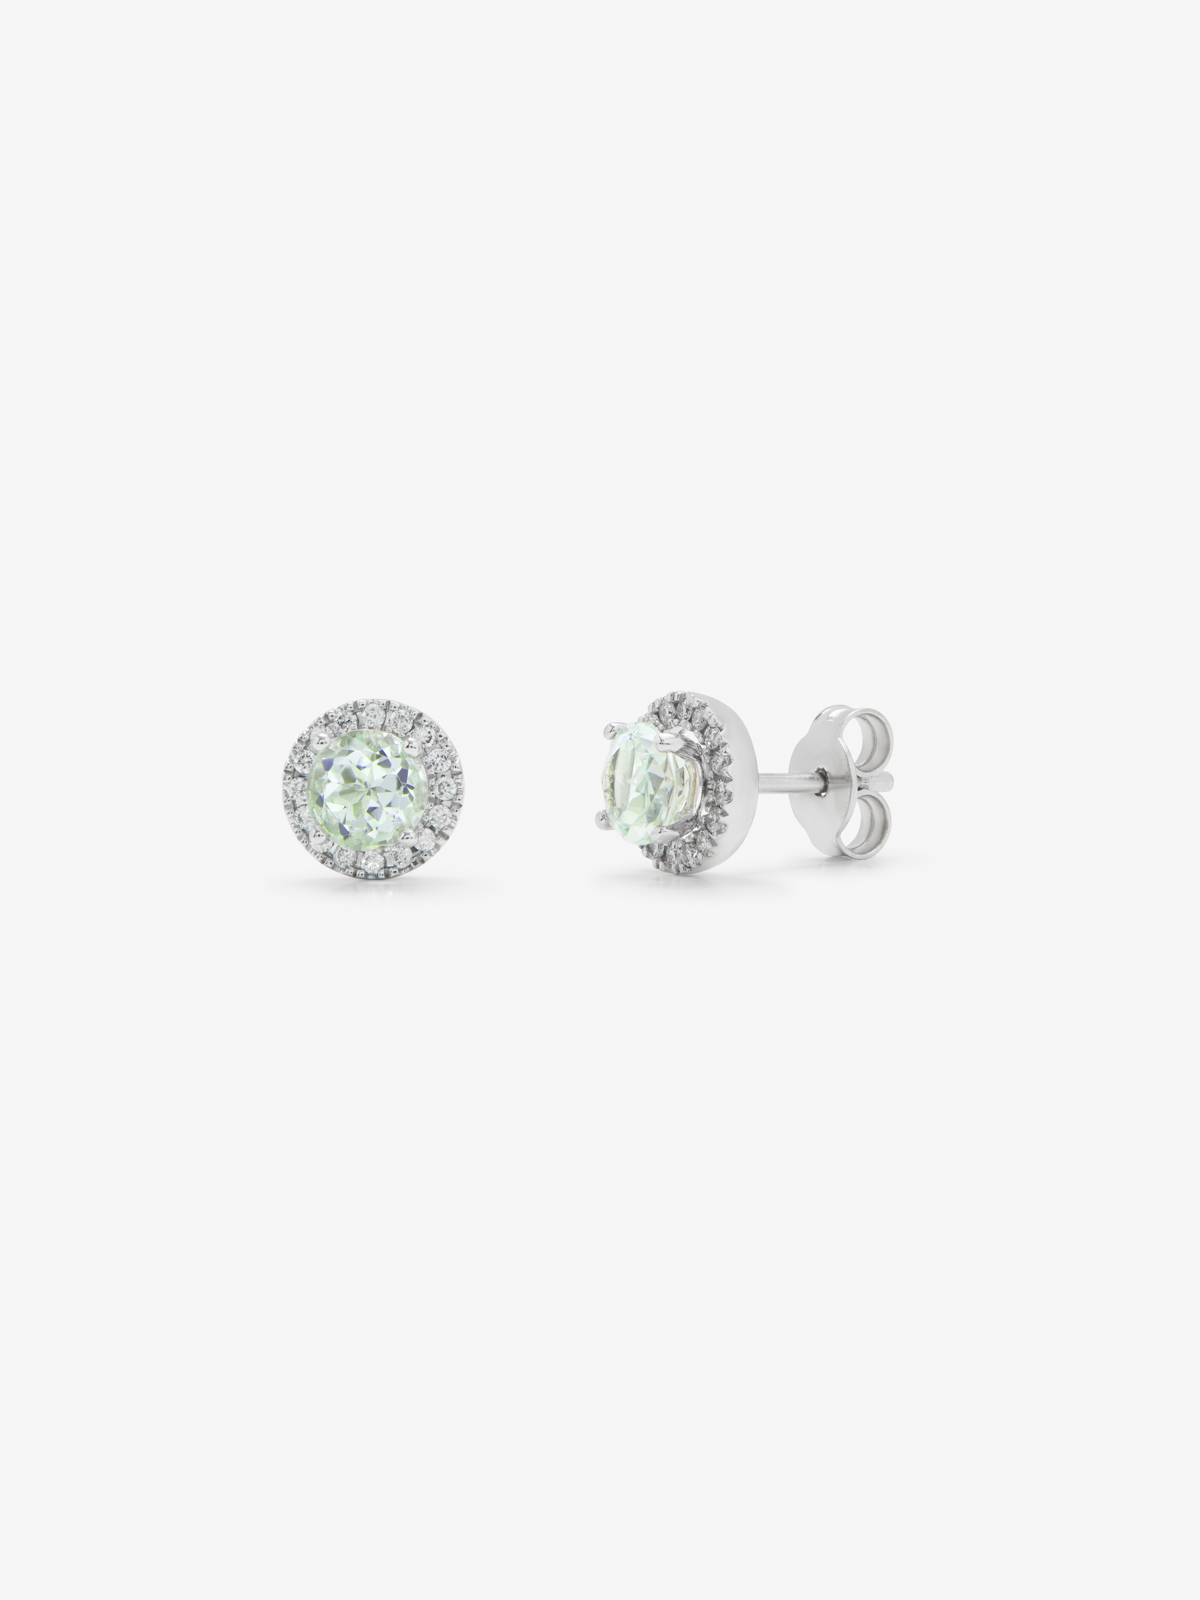 18K White Gold Button Earrings with Green Amethyst and Diamond